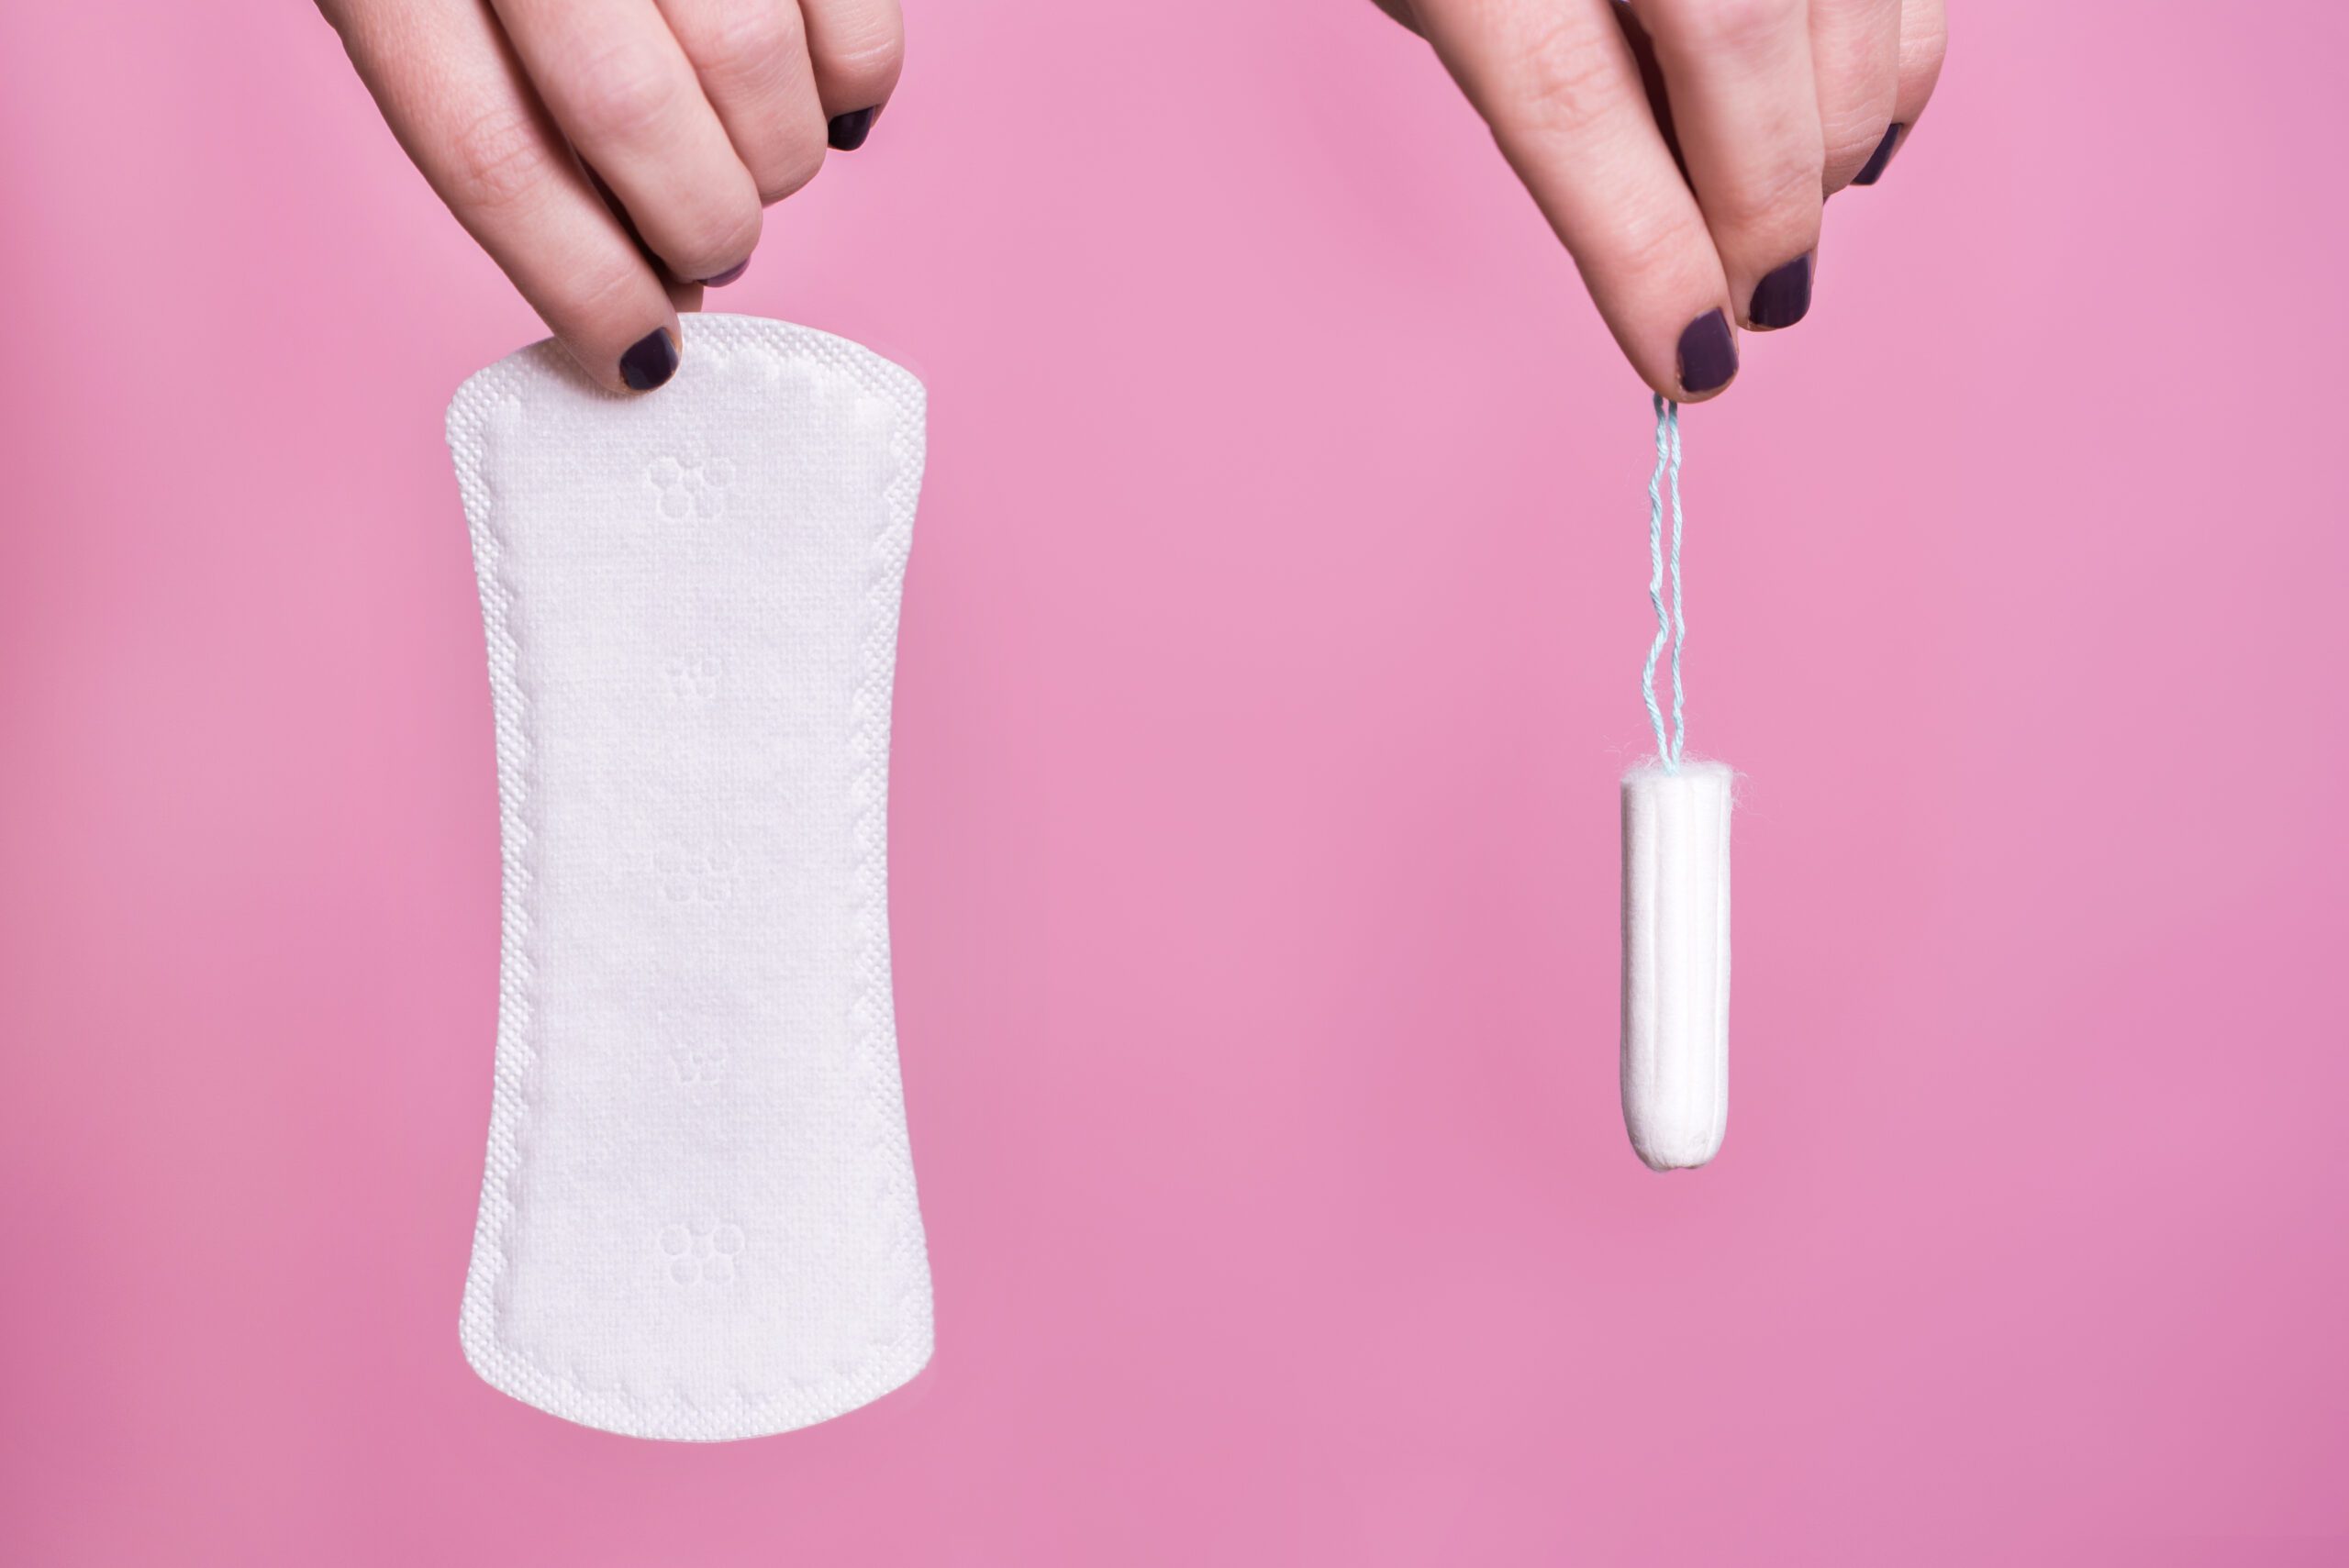 Adult diapers using the sanitary napkin narrative